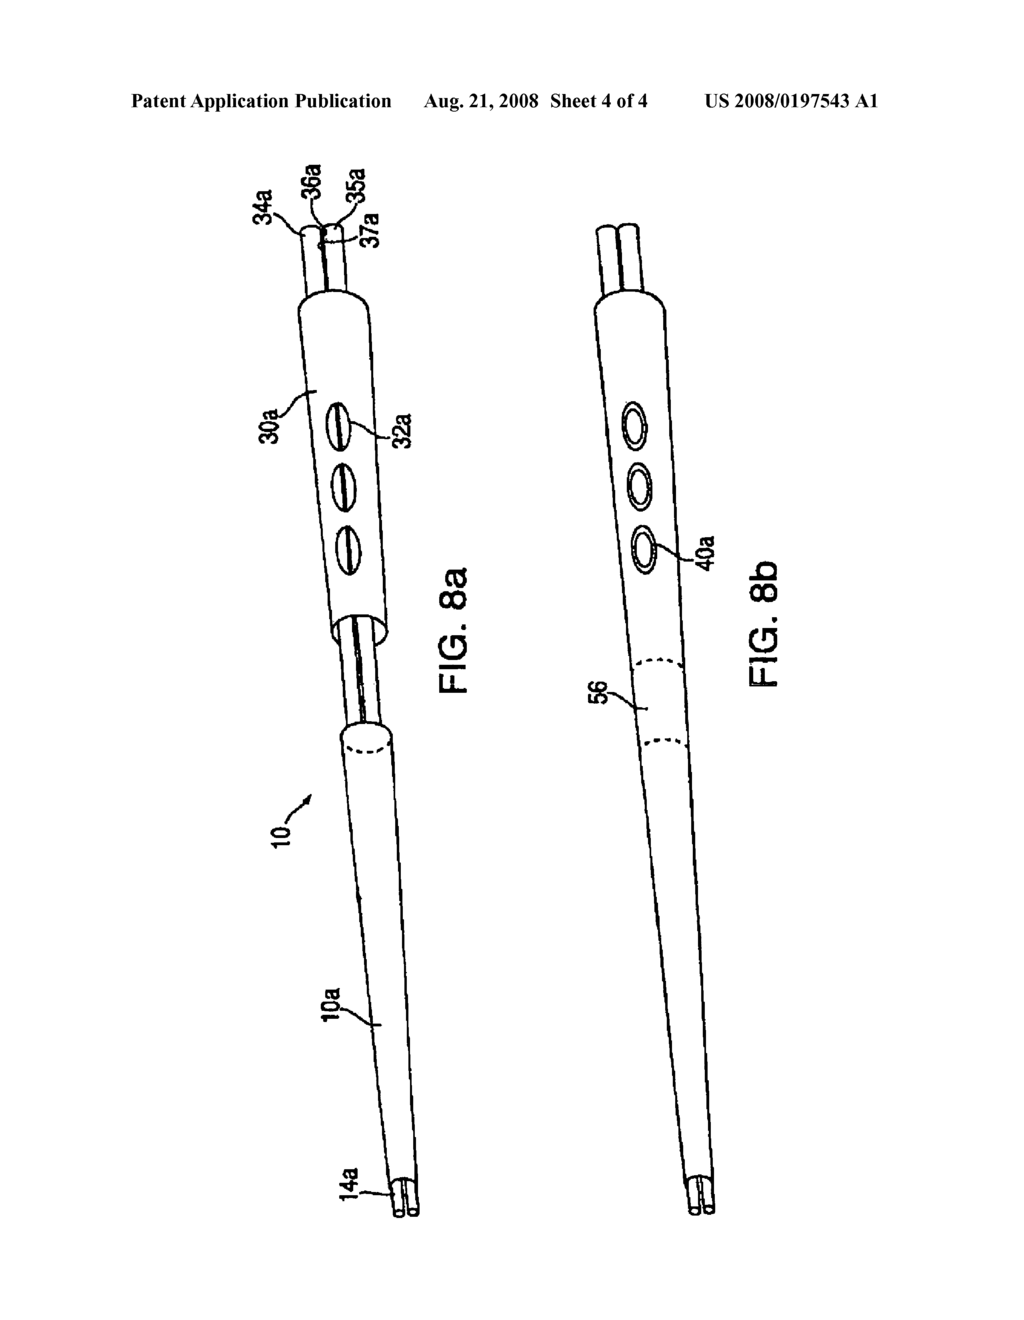 Method of Manufacturing Composite Single-Tubed Structures Having Ports - diagram, schematic, and image 05